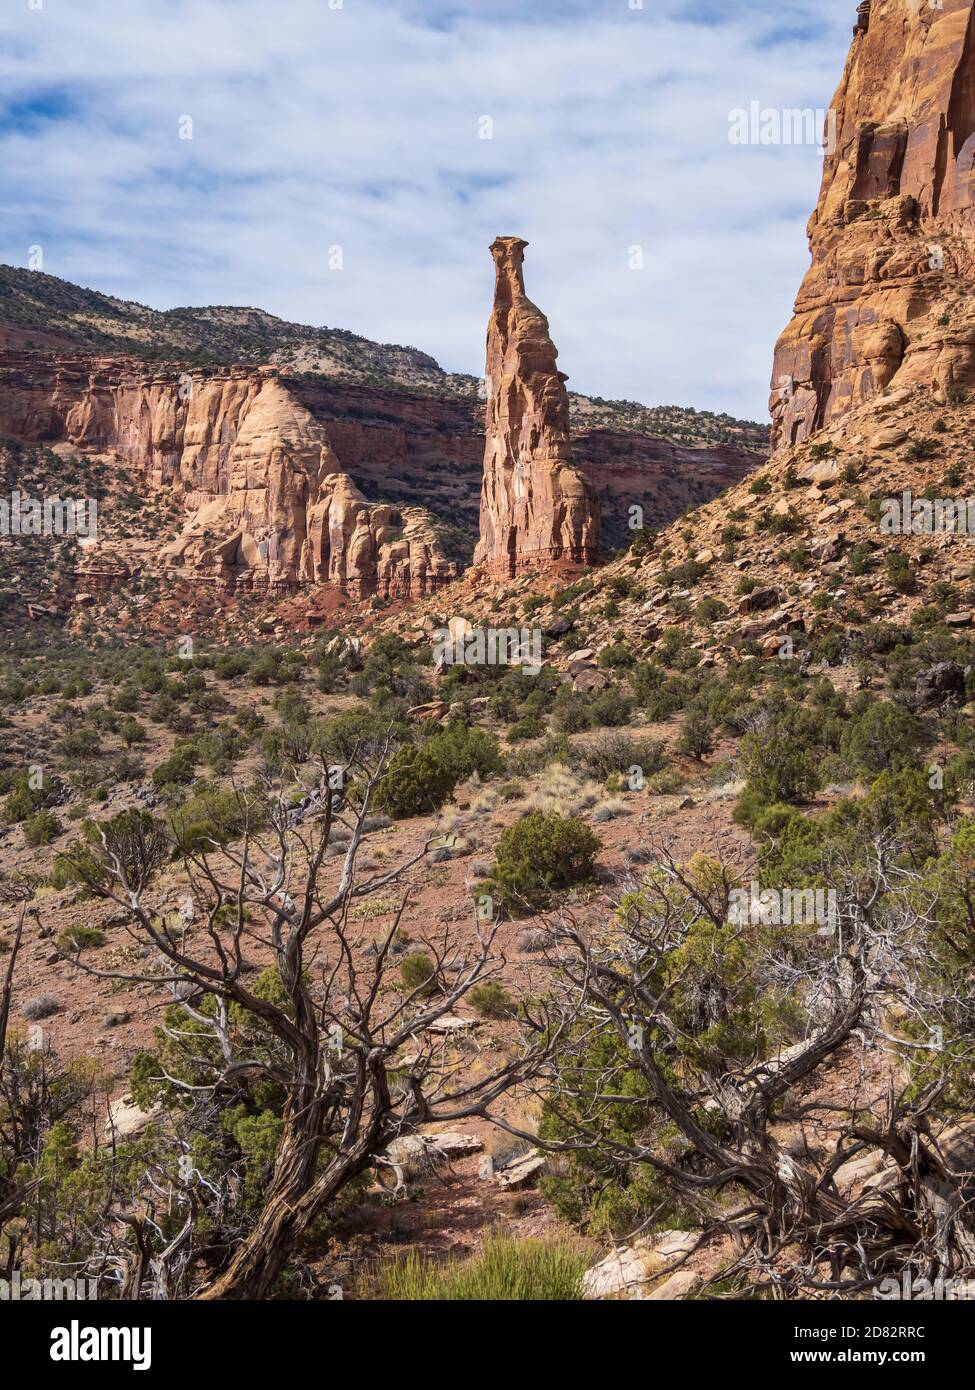 Independence Monument, Monument Canyon Trail, Colorado National Monument vicino a Grand Junction, Colorado. Foto Stock